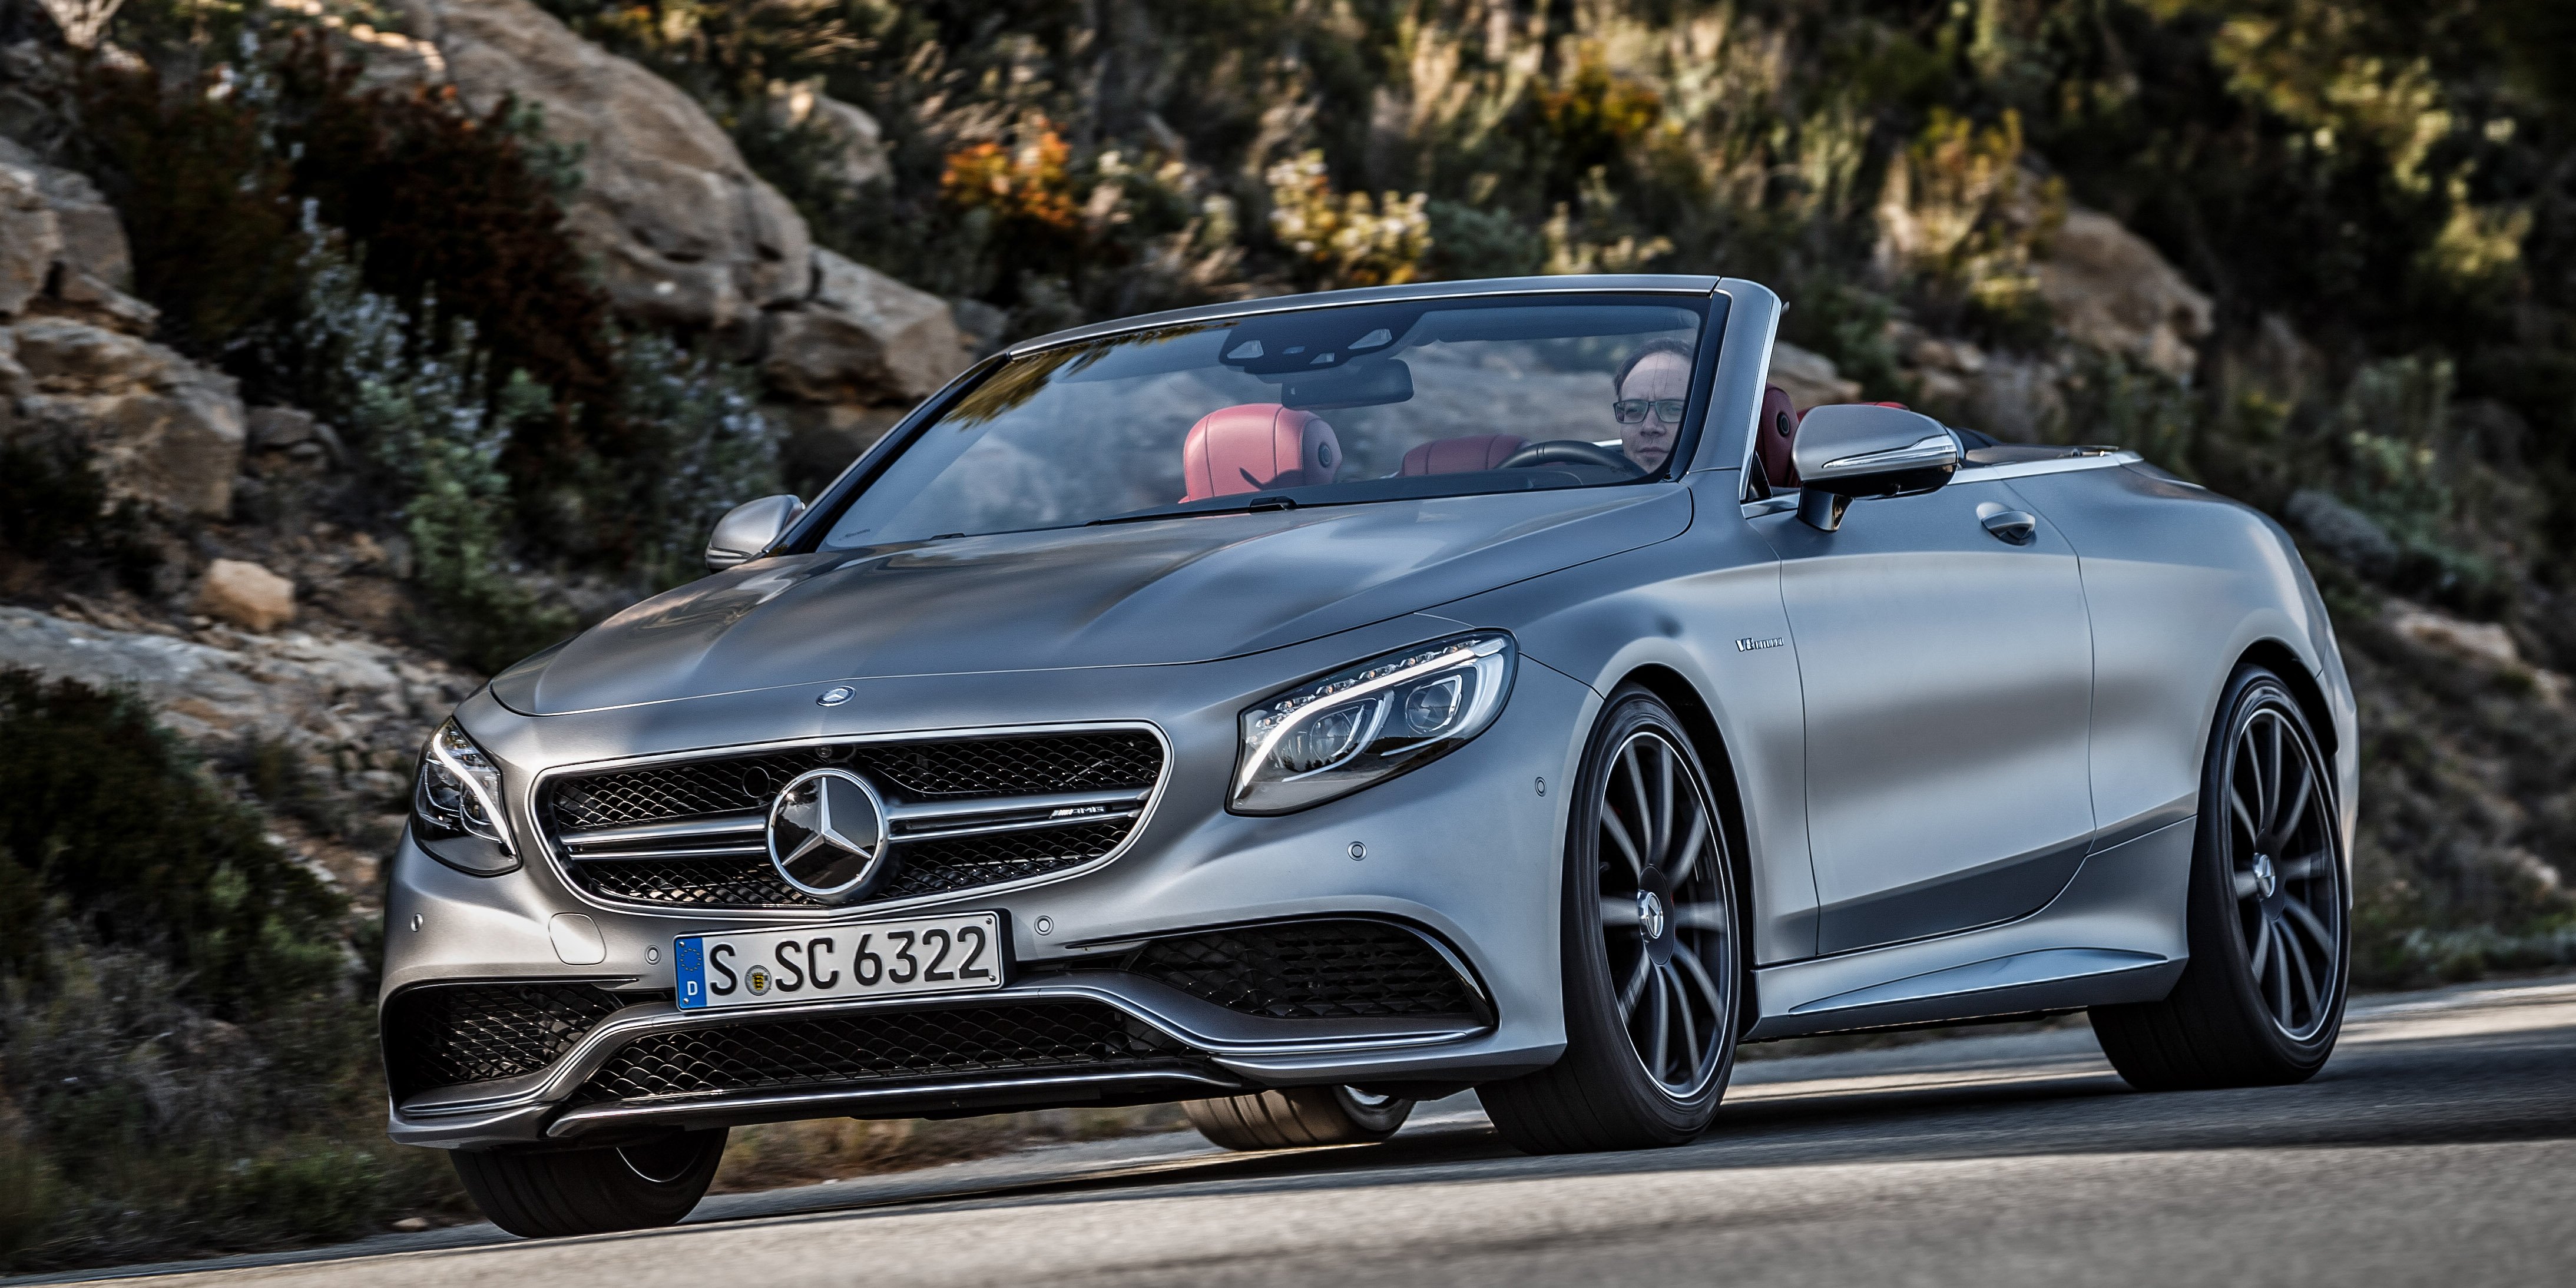 Mercedes S-Class Cabriolet (A217) mod specifications